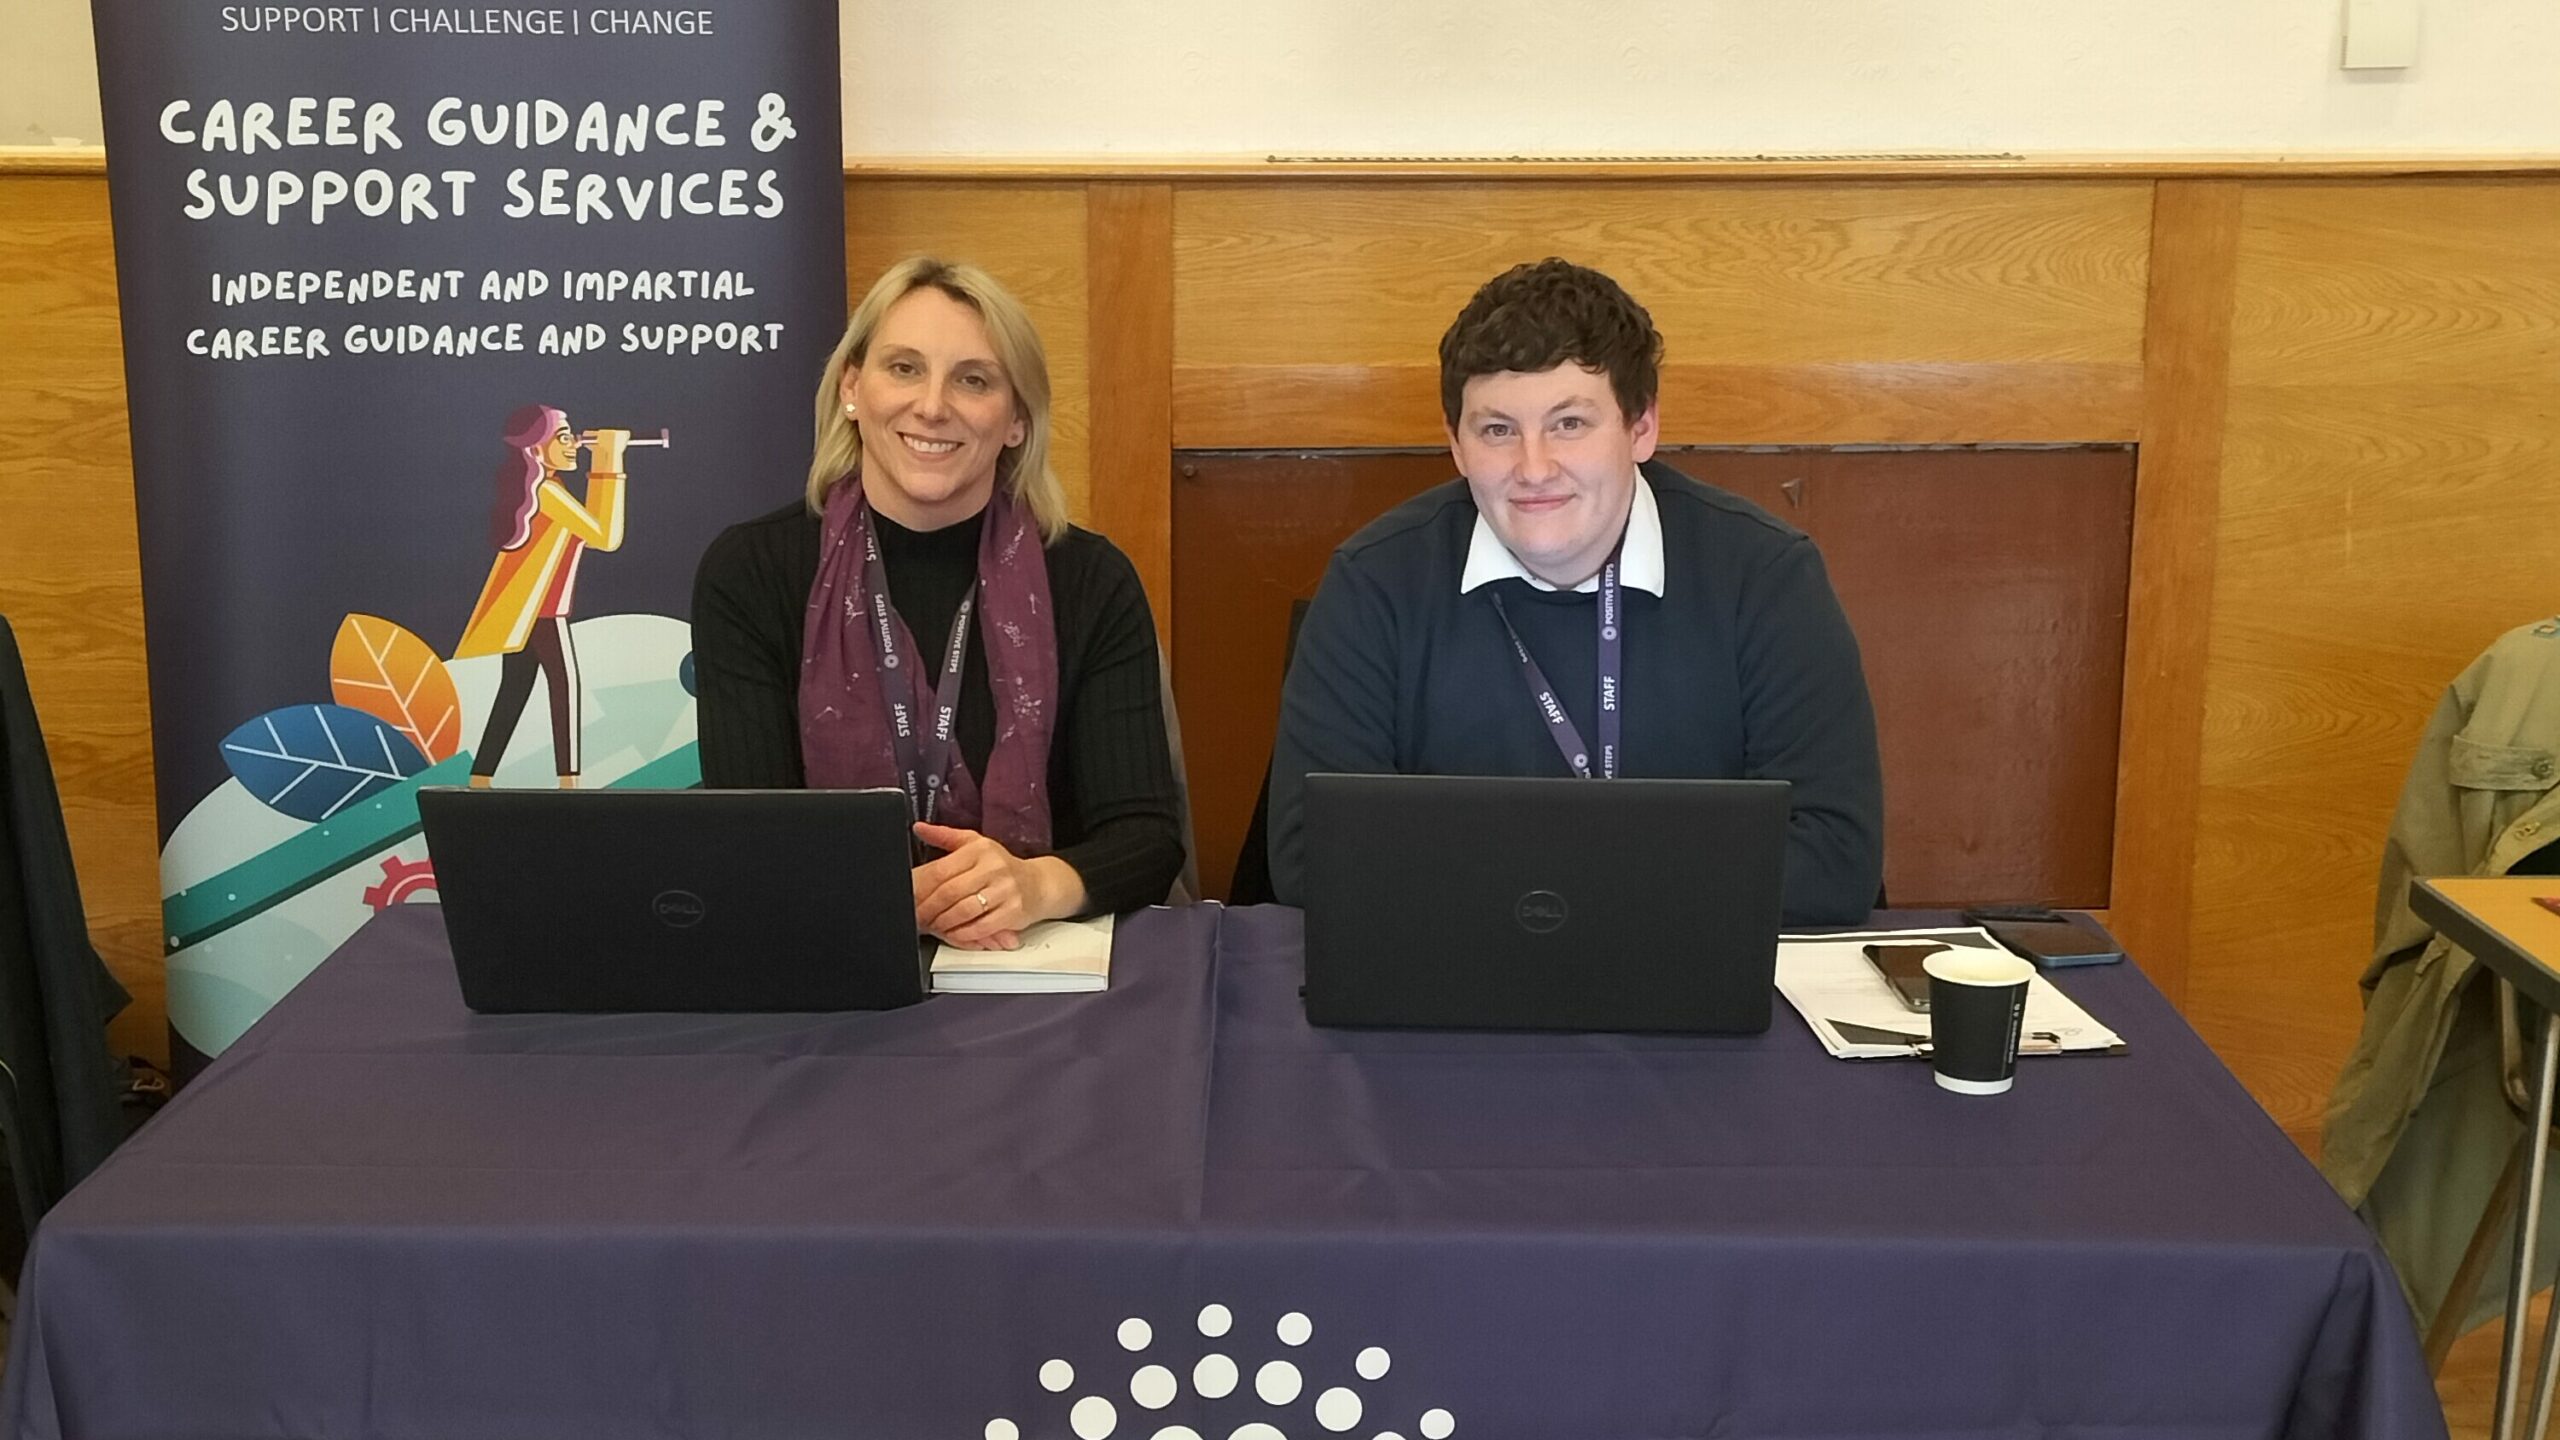 Ben and Joanna at a careers event in Tameside.